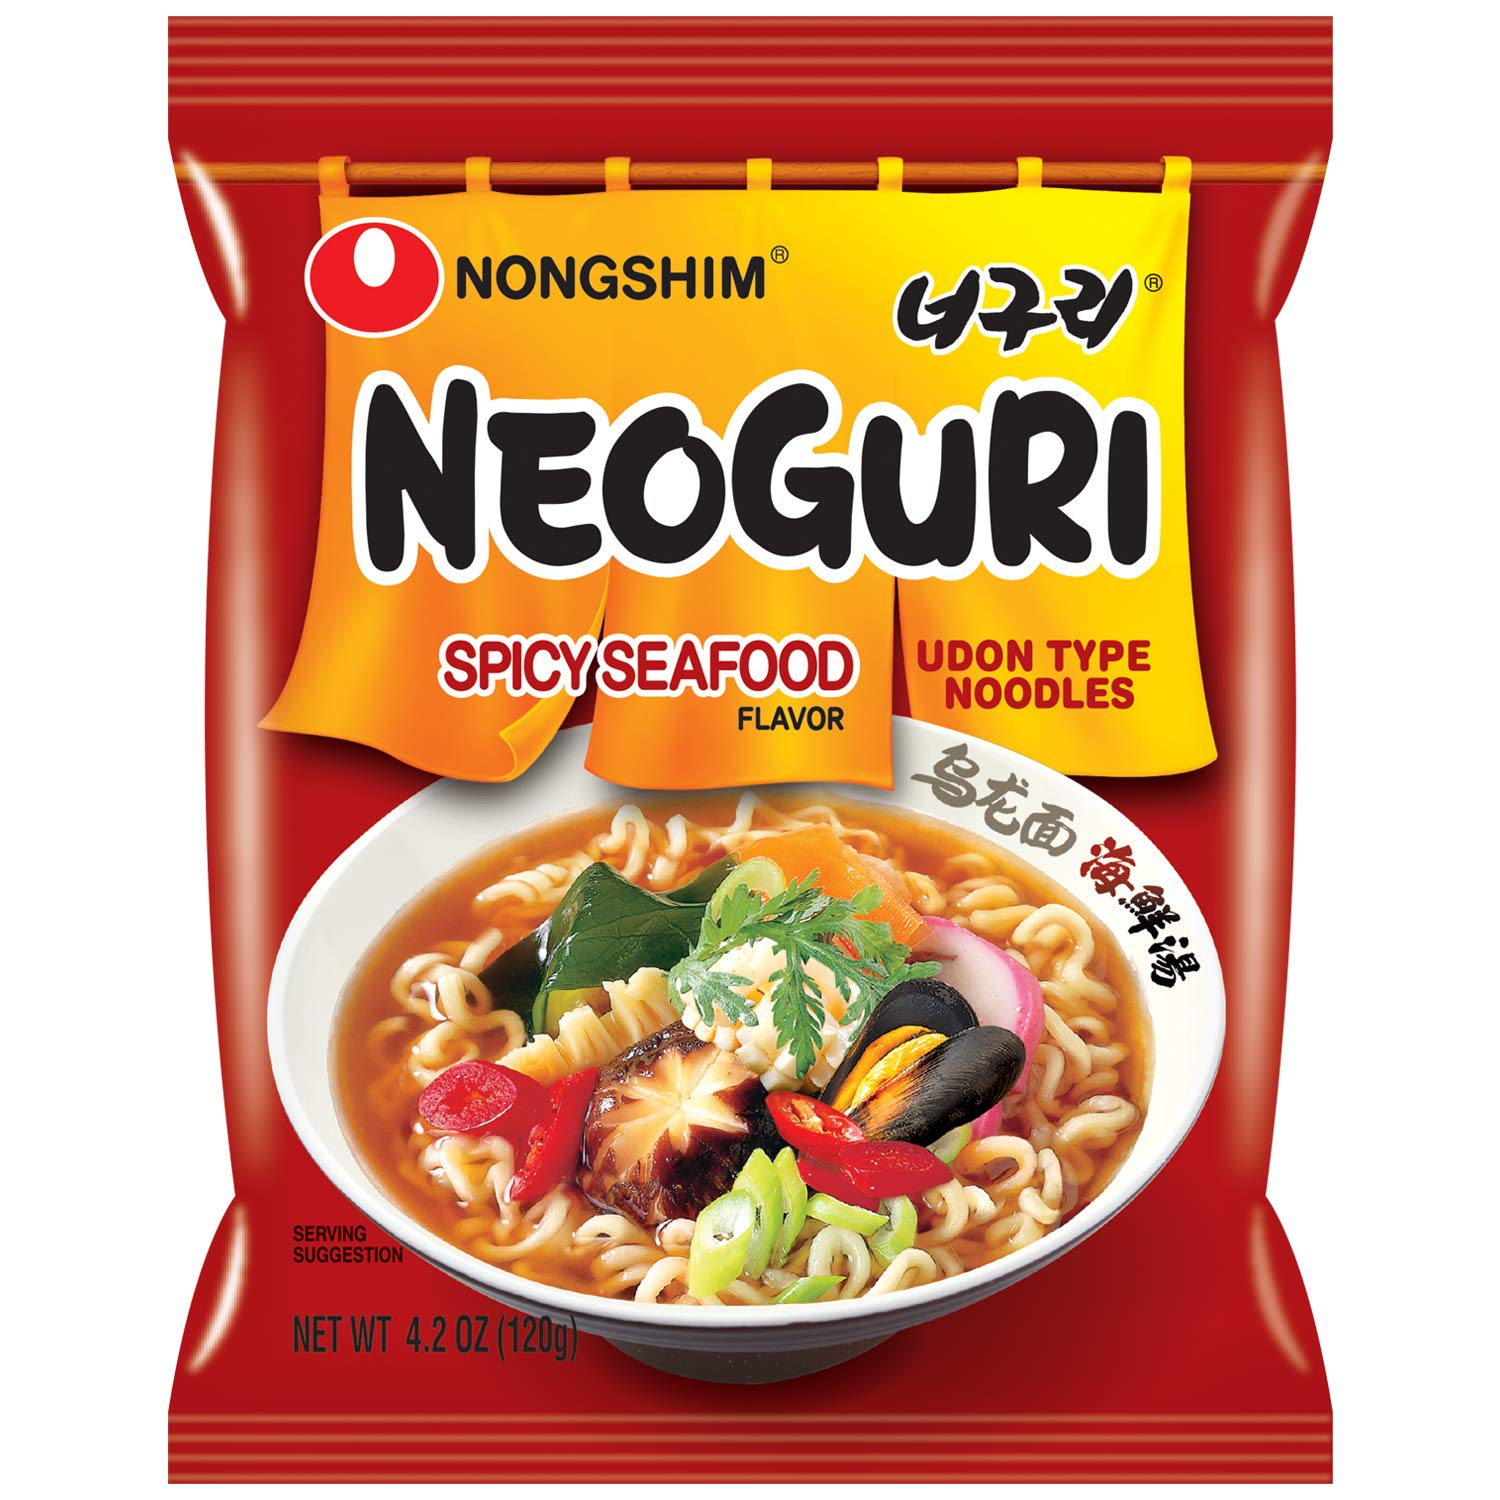 Amazon.com : Nongshim Neoguri Noodles, Spicy Seafood, 4.2 Ounce (Pack of 16)  $10.33 with s&s $10.33